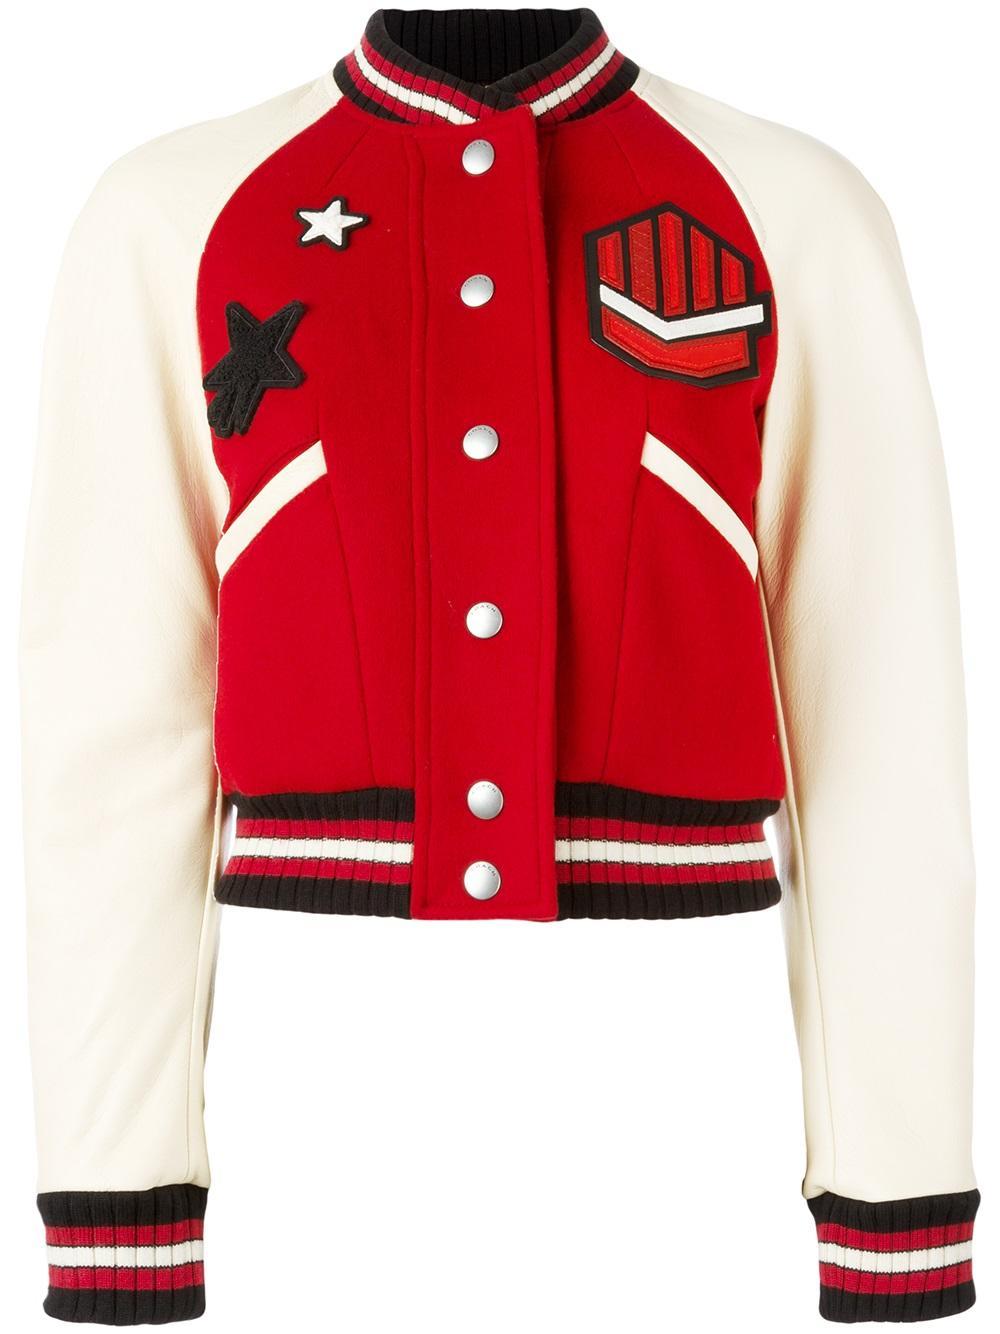 COACH Leather Varsity Jacket in Red - Lyst